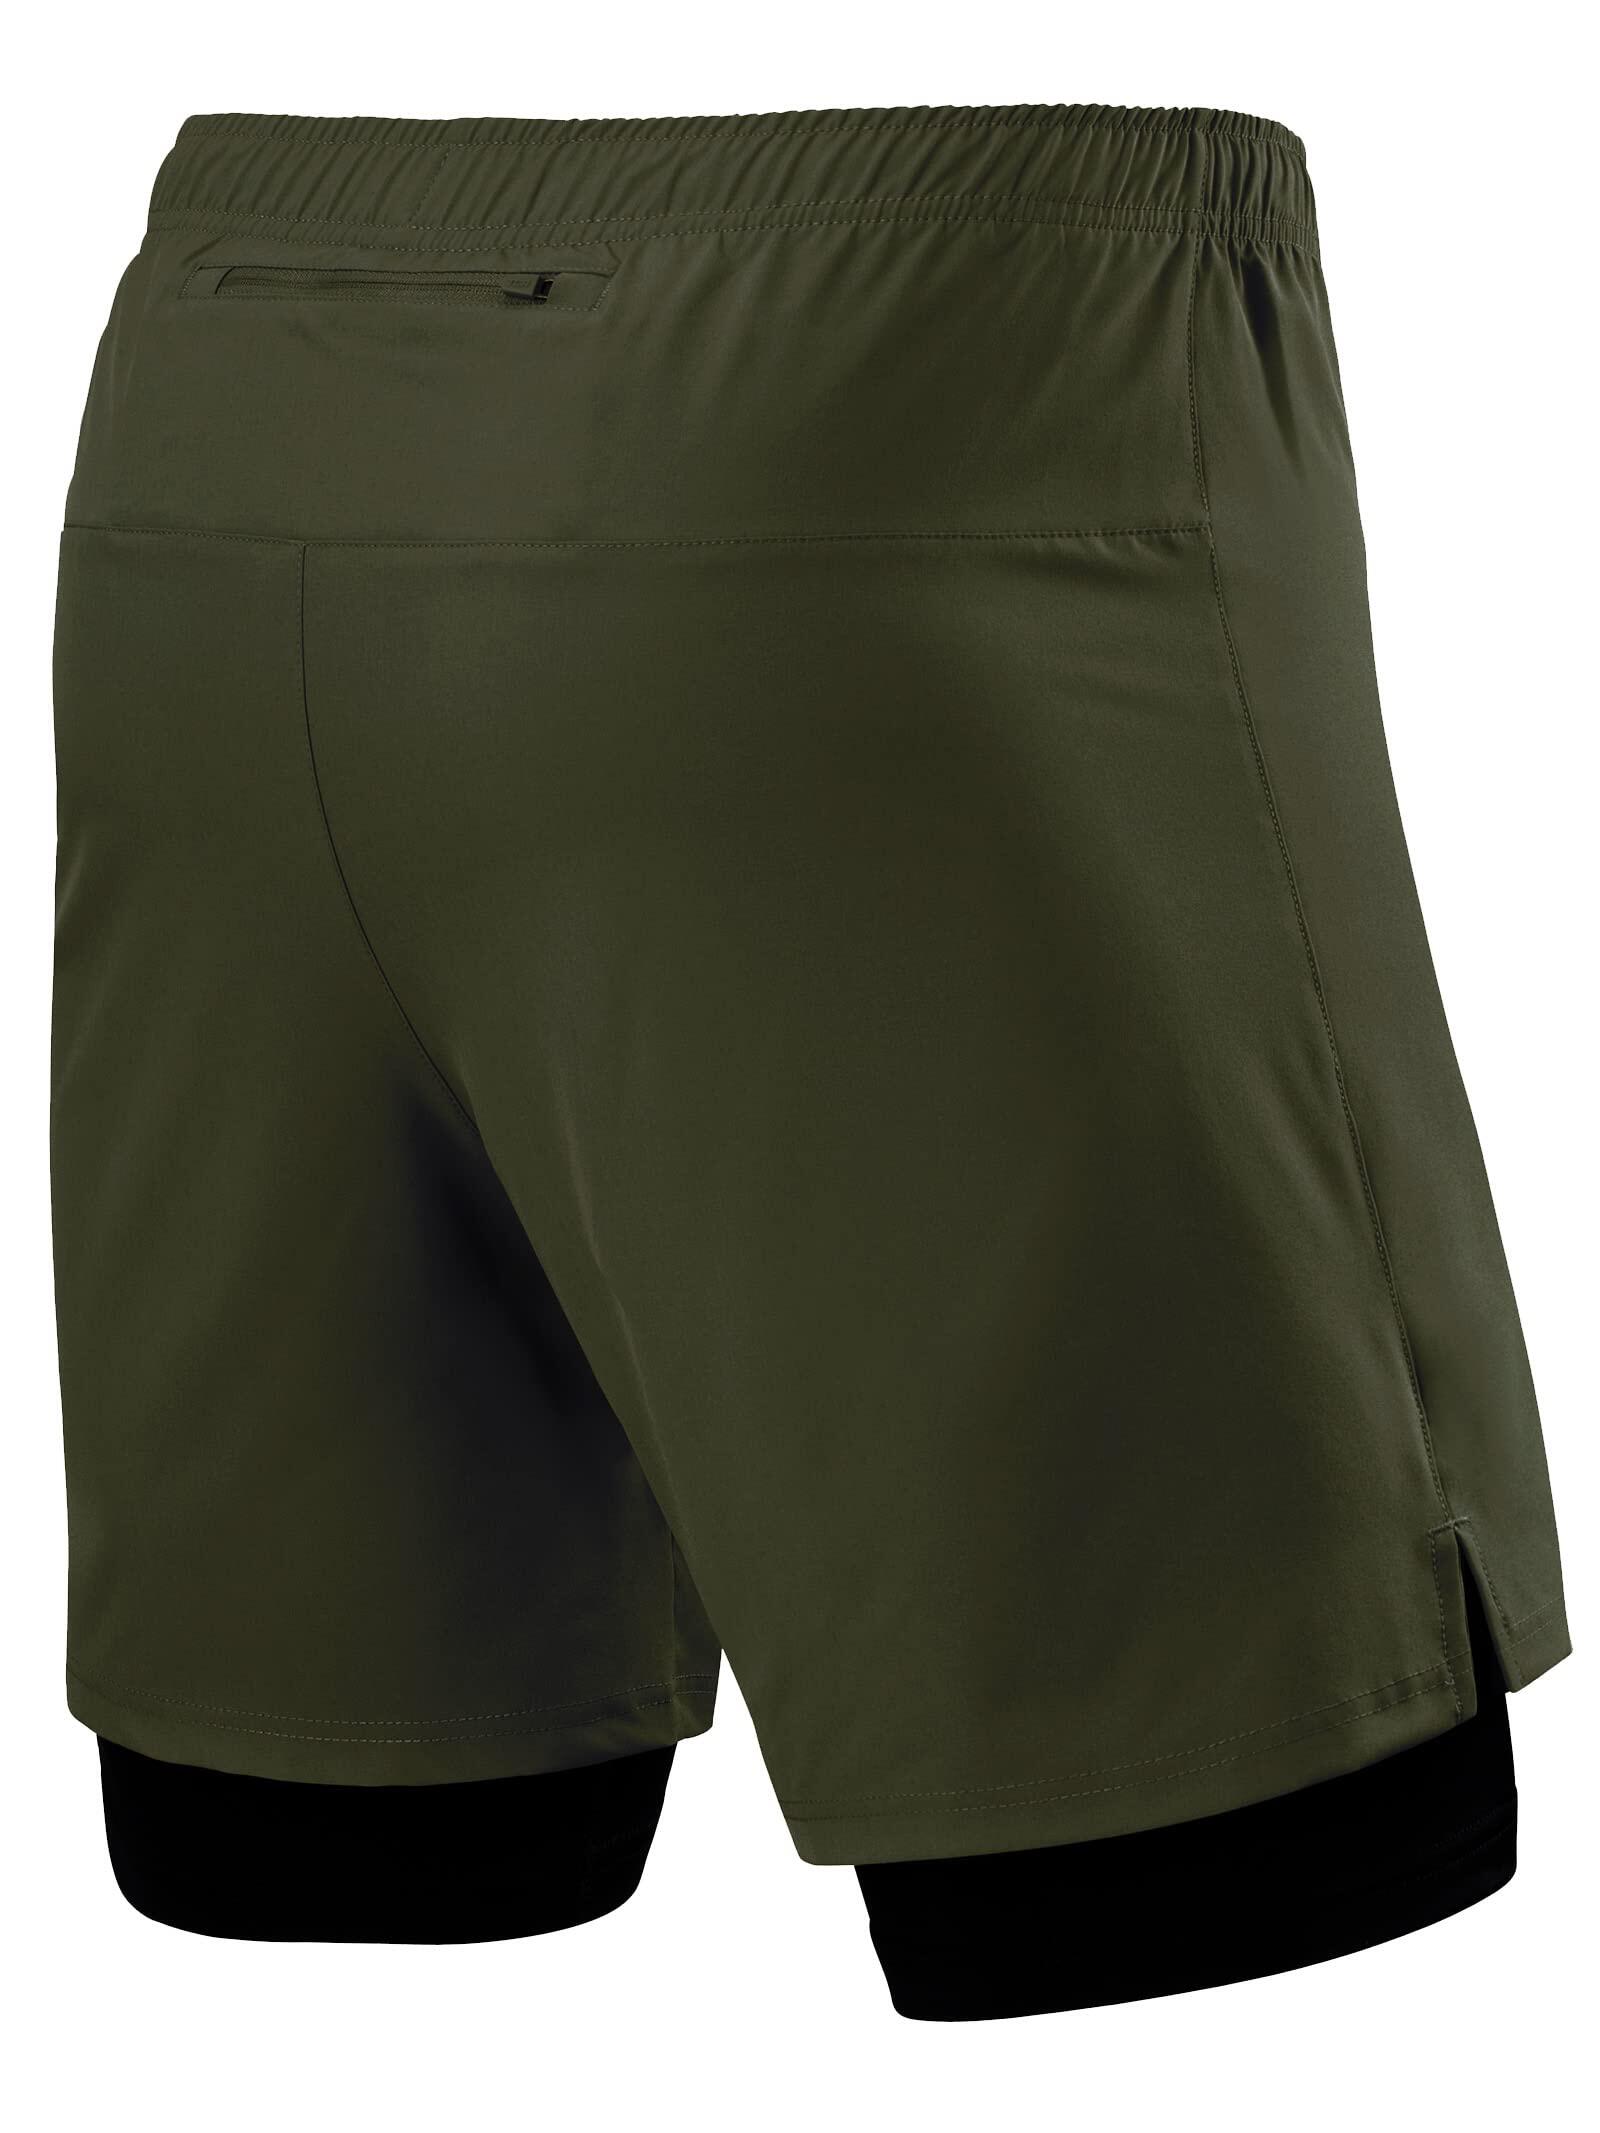 Men's Ultra 2-in-1 Running Shorts with Key Pocket - Forest Night 2/5